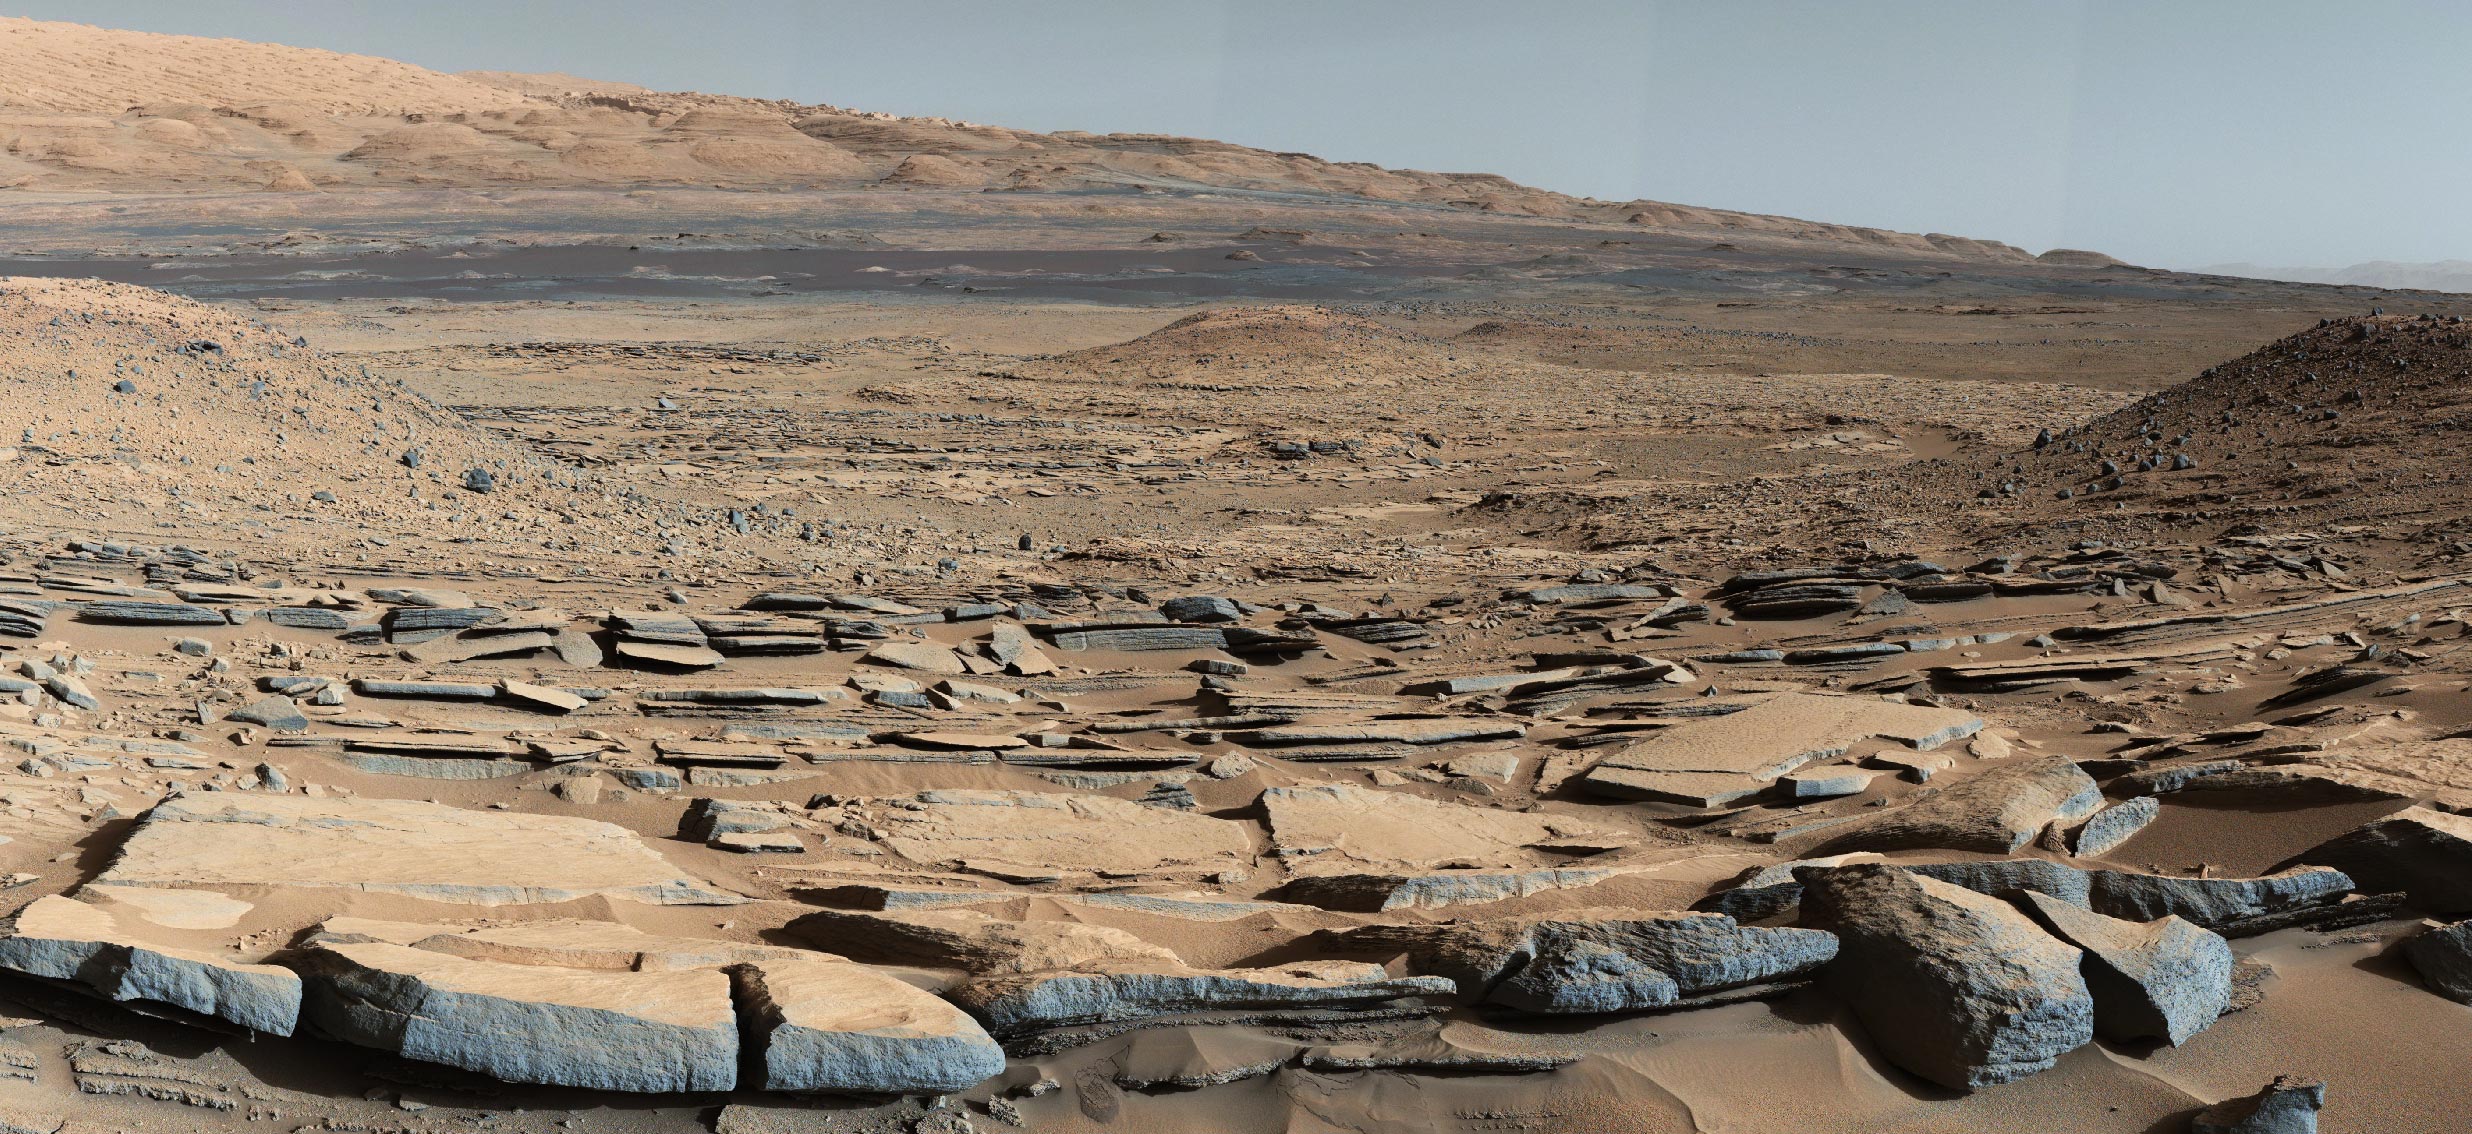 Mars did not dry up at once – Mars climate traveled between dry and wet periods